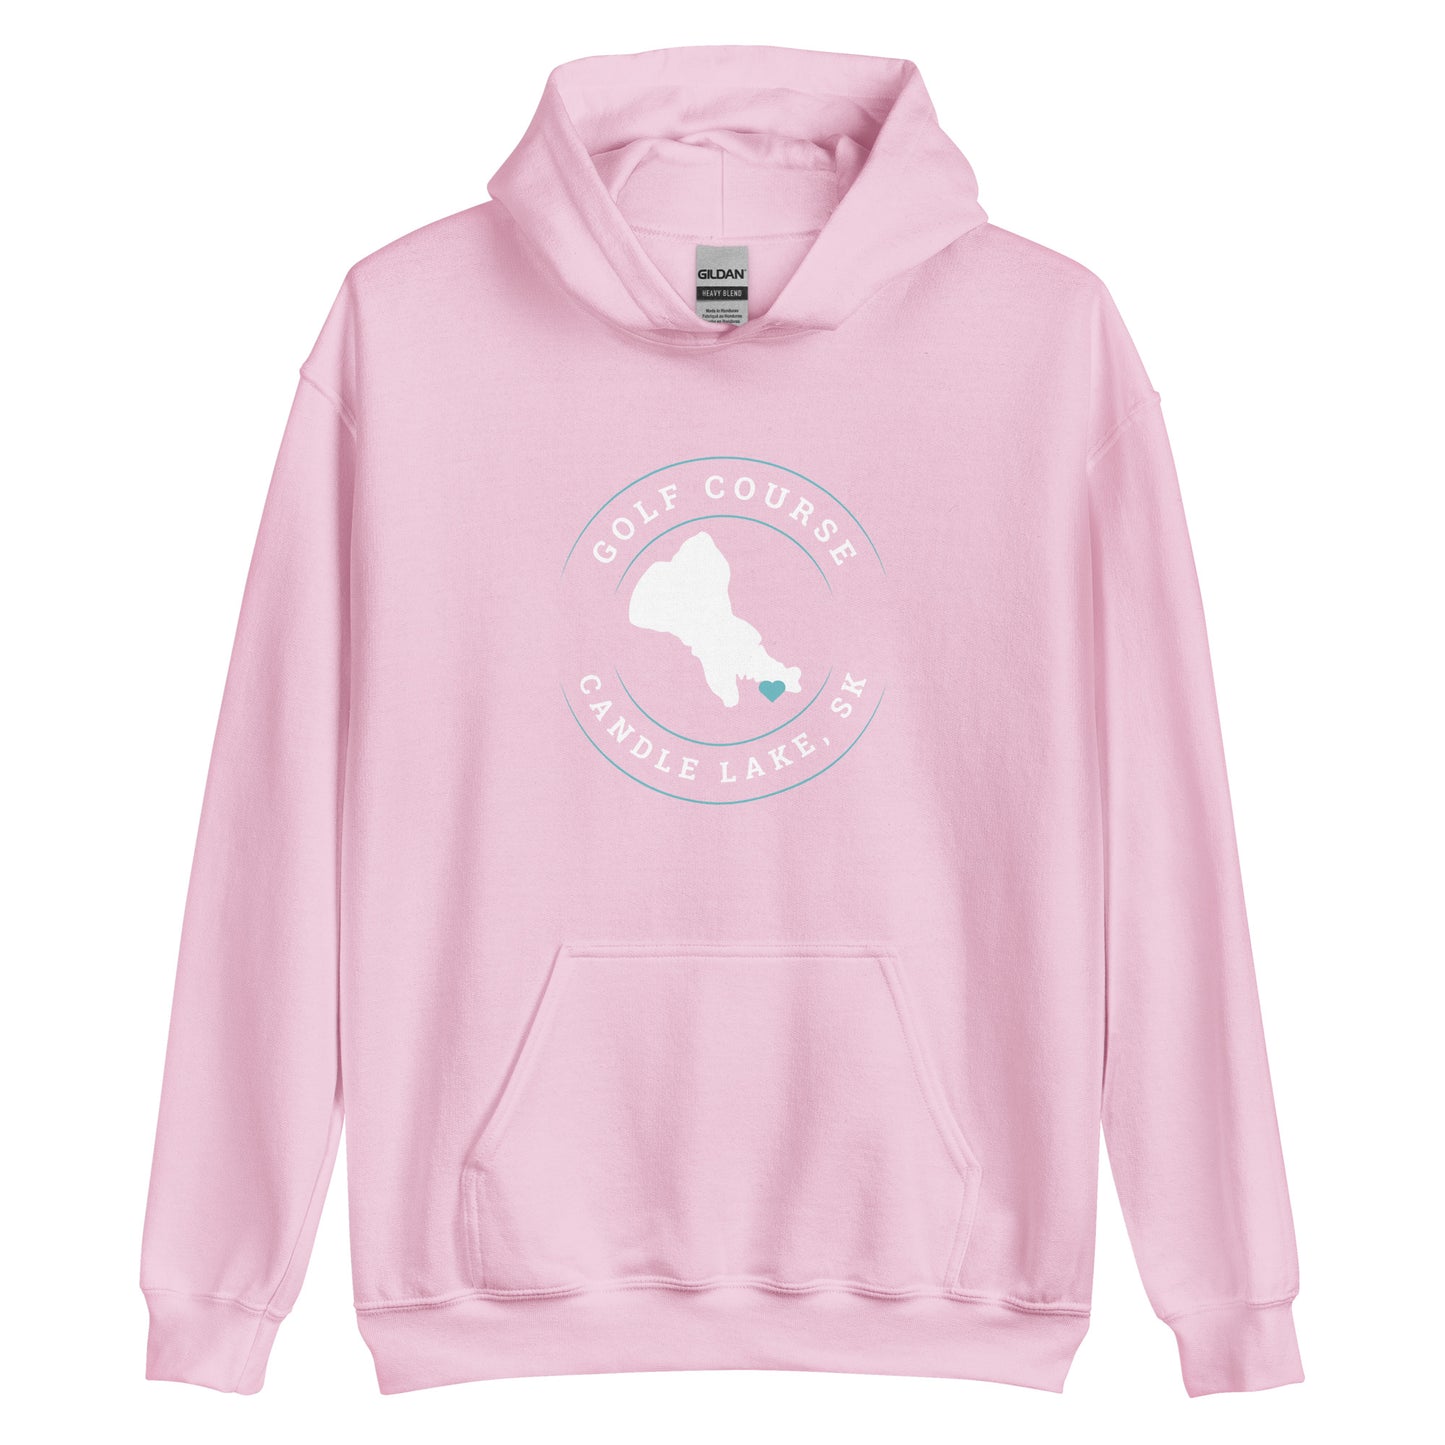 Candle Lake, SK - Unisex Hoodie - Golf Course